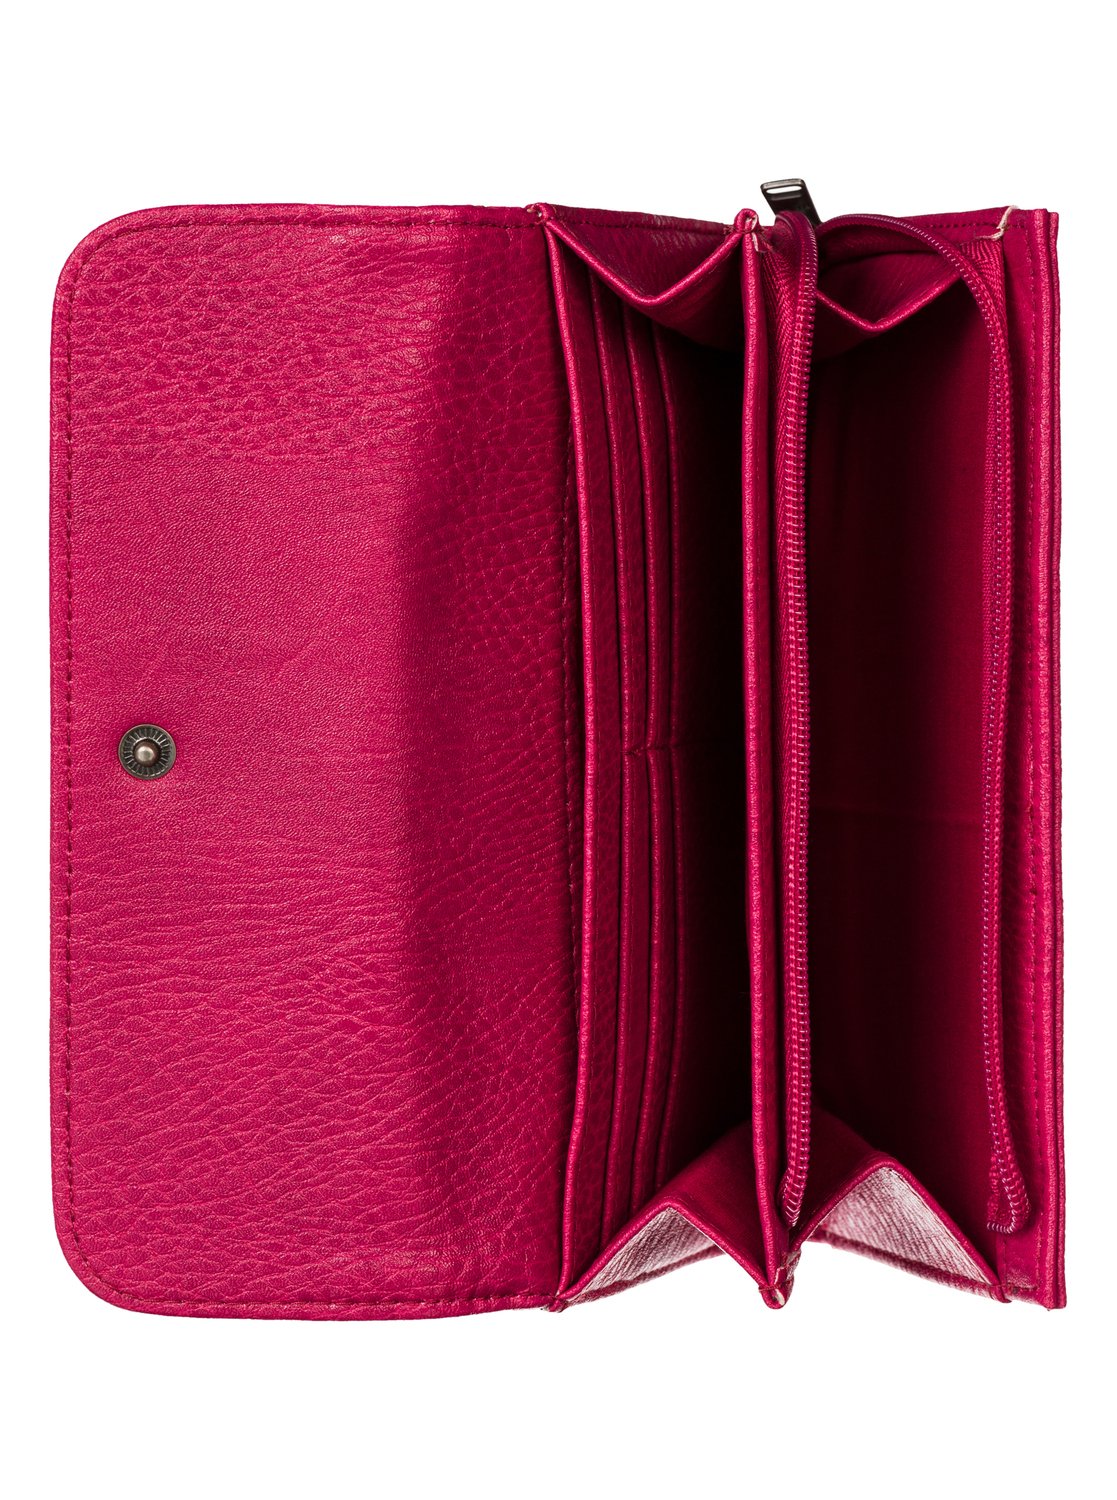 One More Day Wallet ARJAA03052 | Roxy